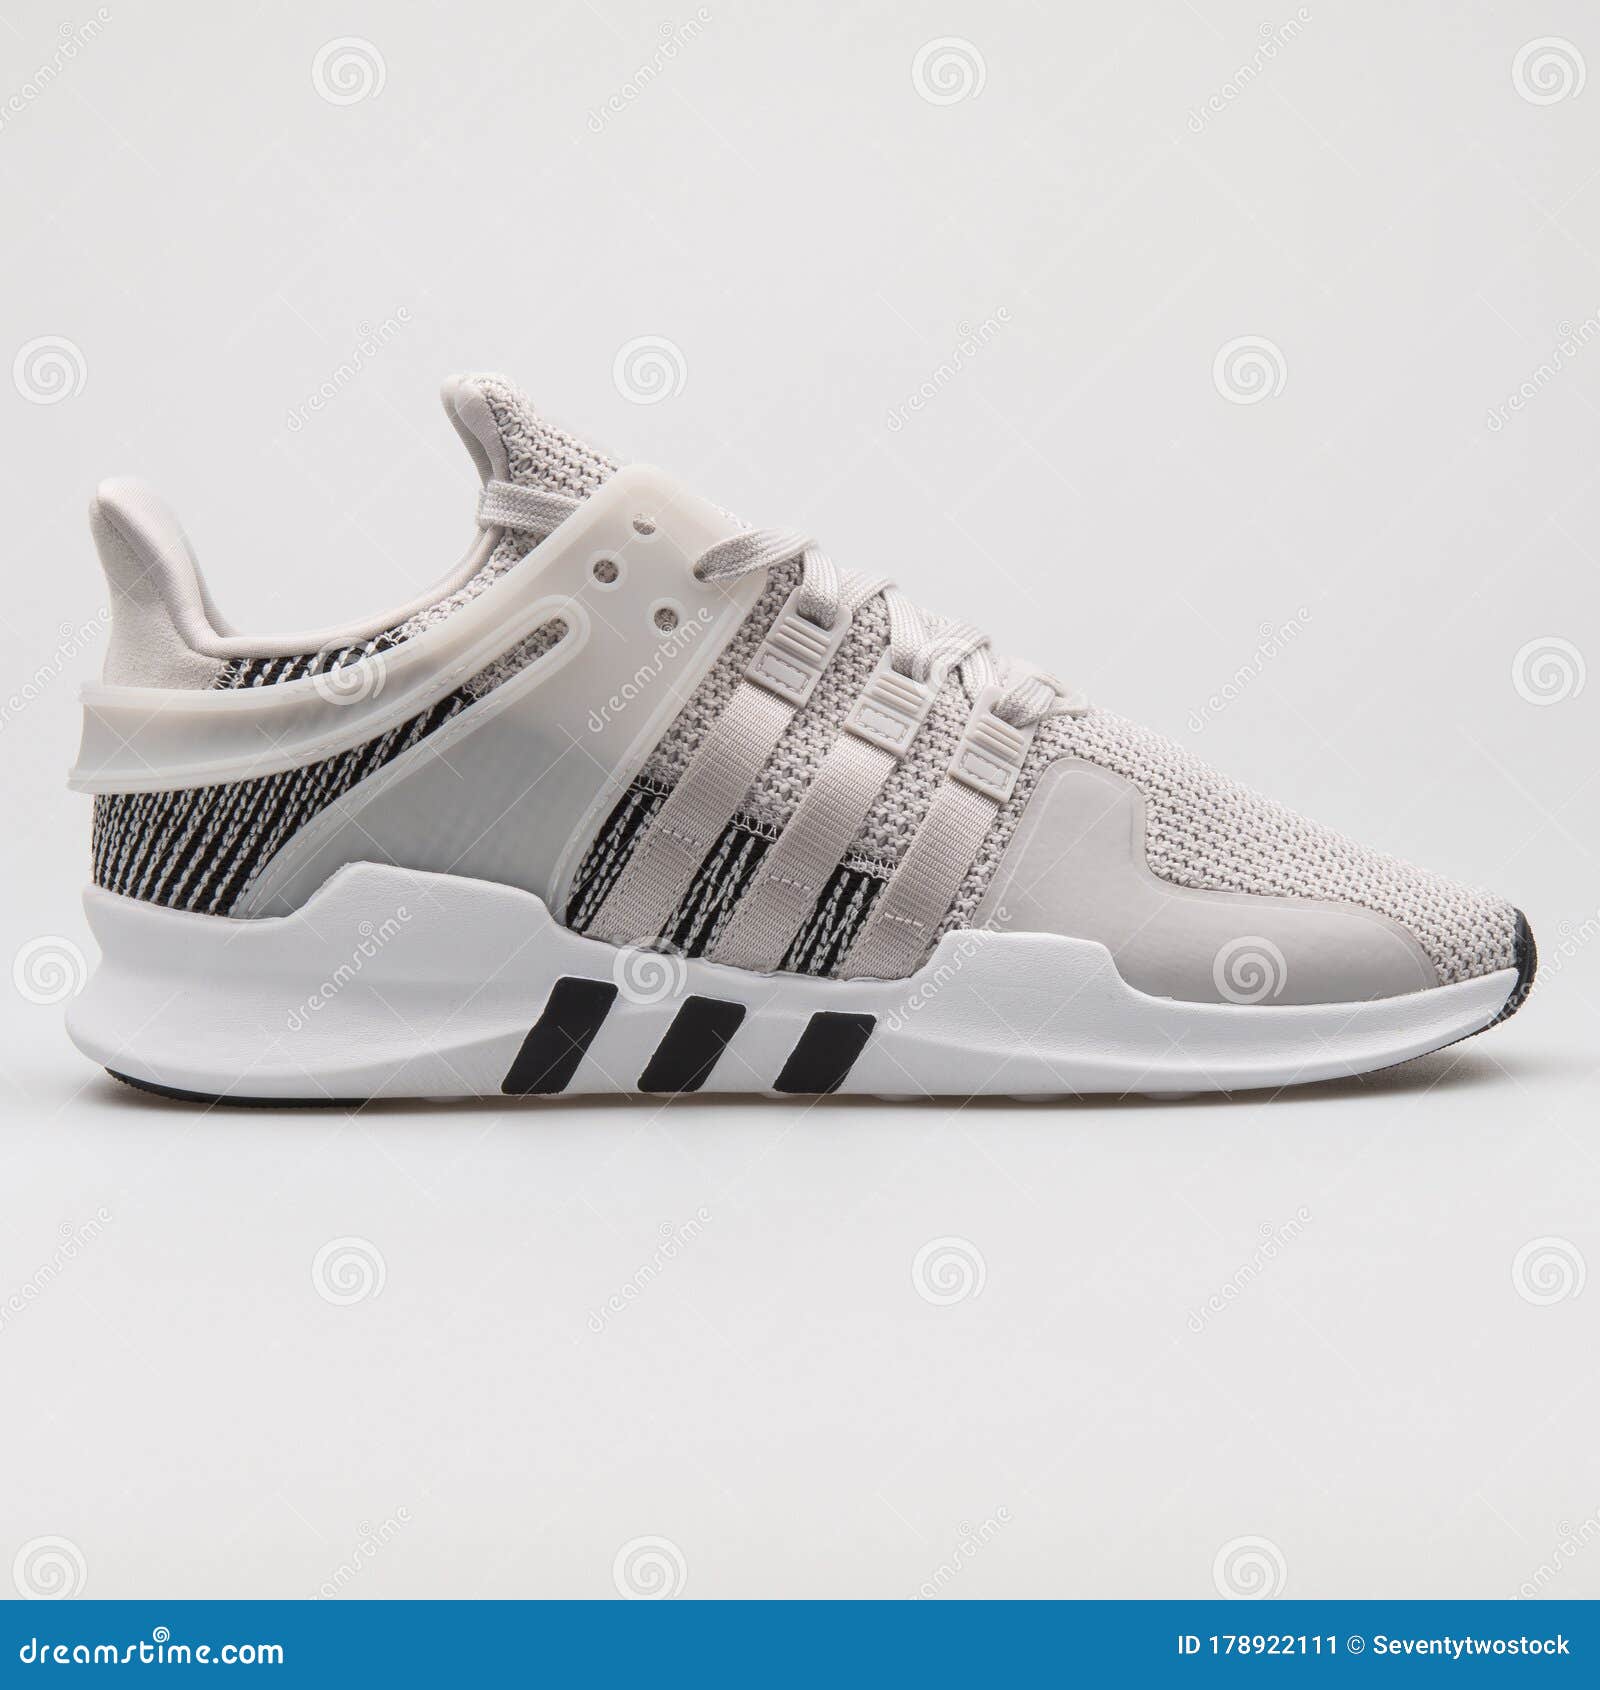 Risa Grillo frase Adidas EQT Support ADV White and Grey Sneaker Editorial Photo - Image of  kicks, item: 178922111